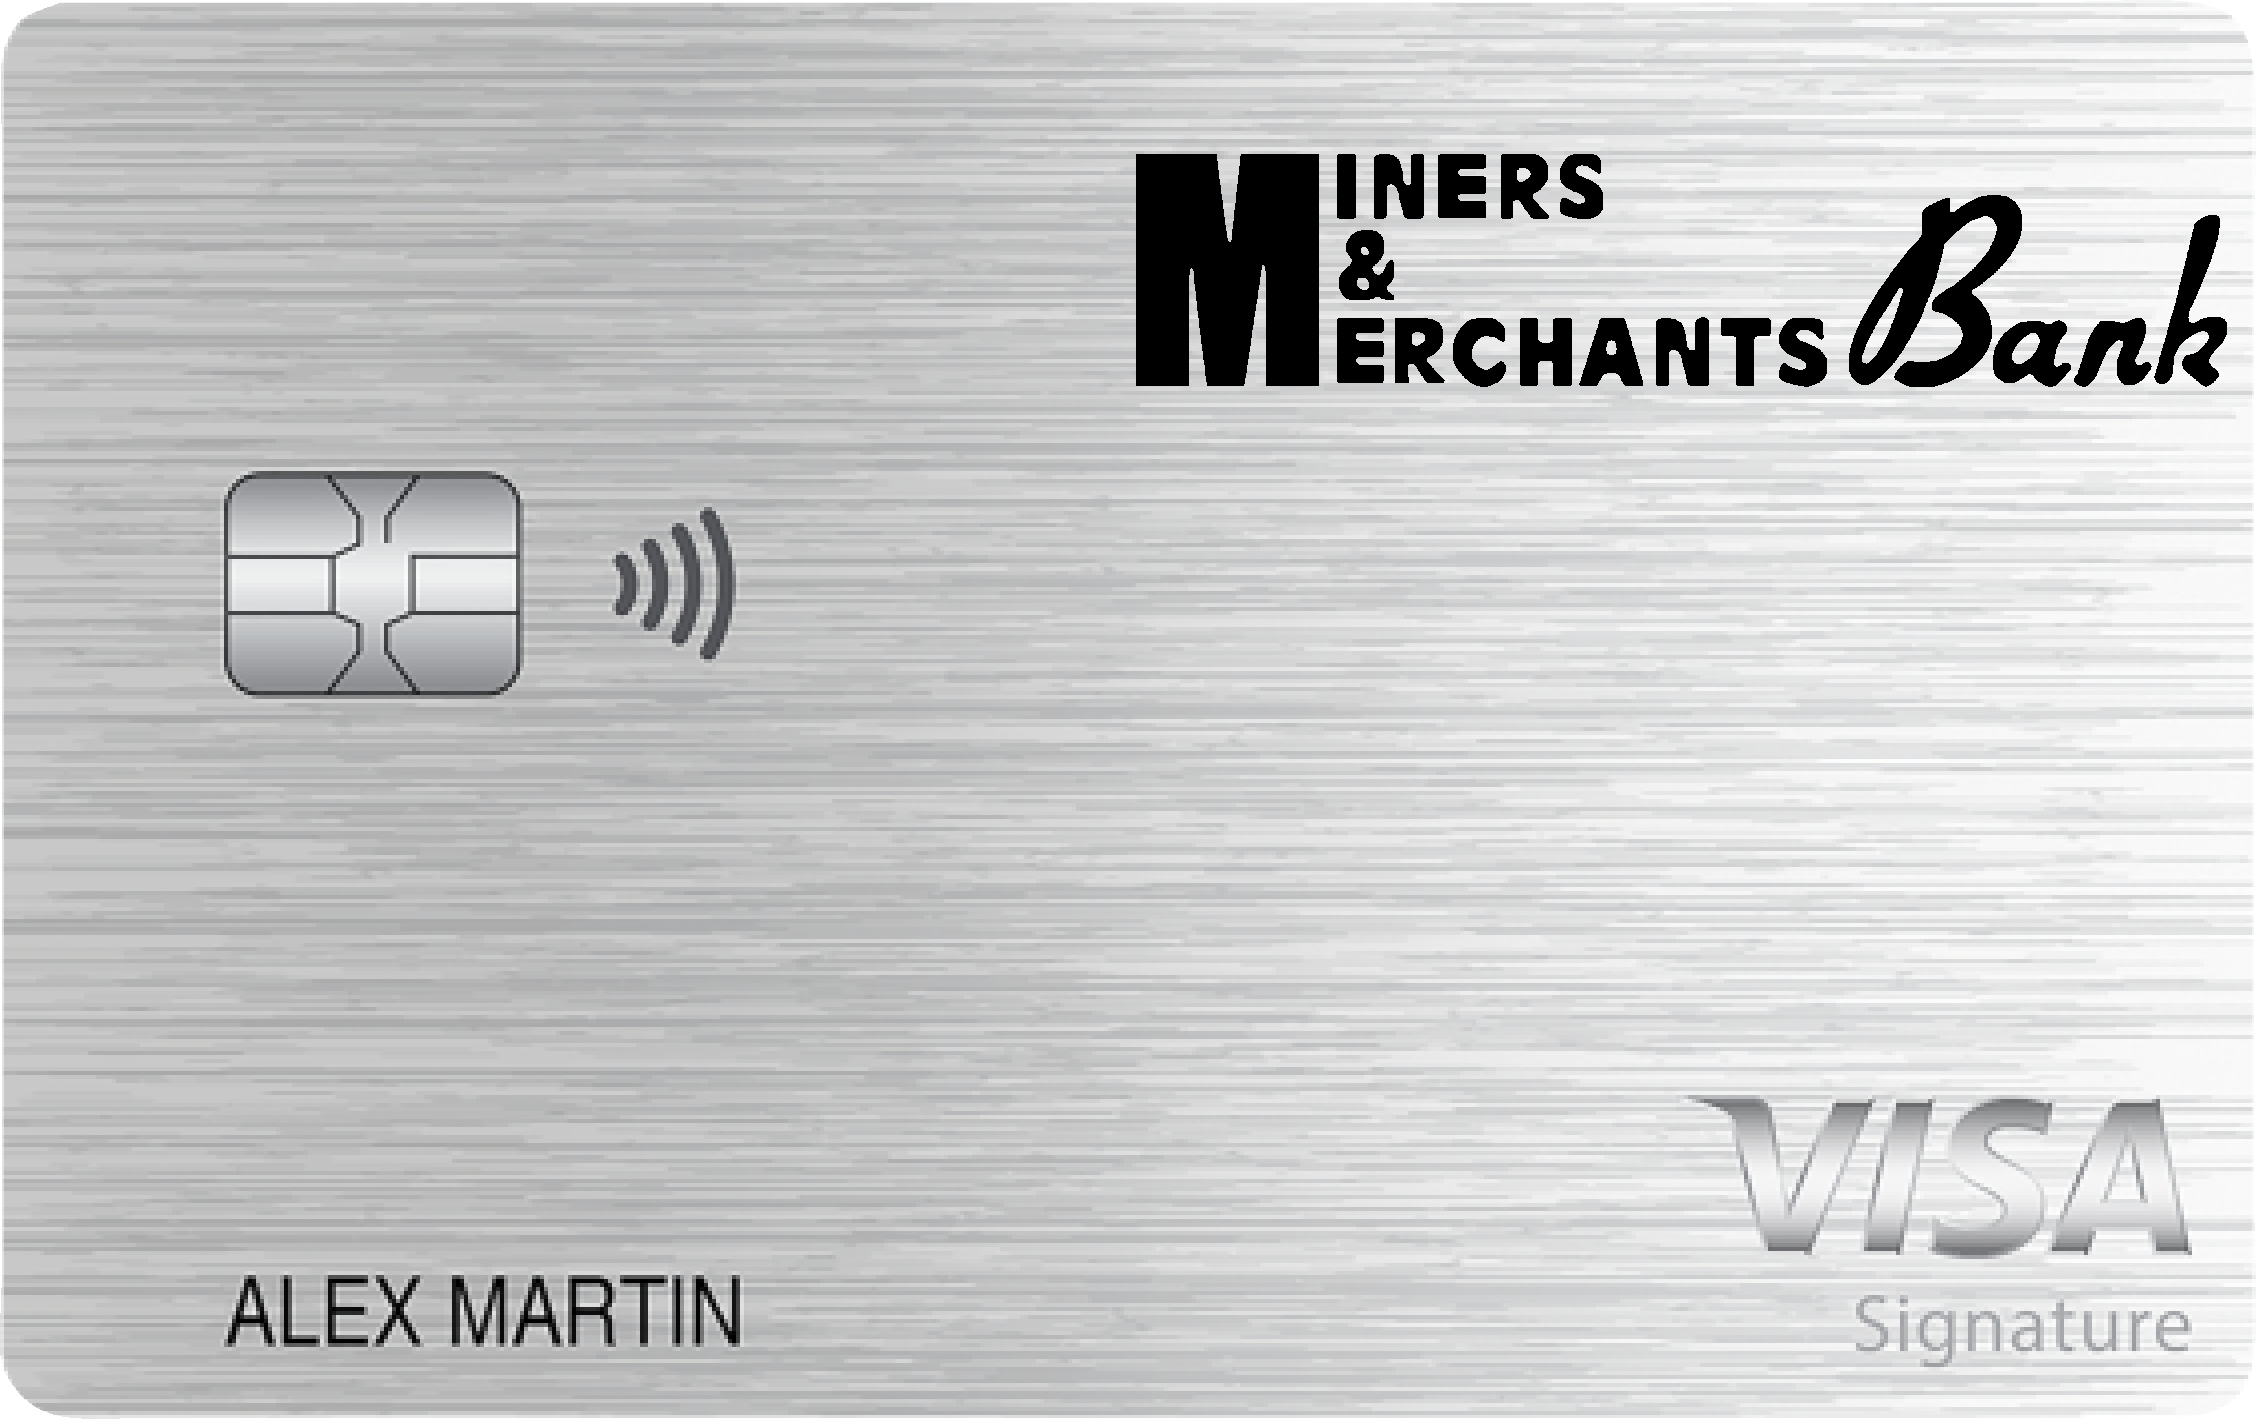 Miners and Merchants Bank Travel Rewards+ Card